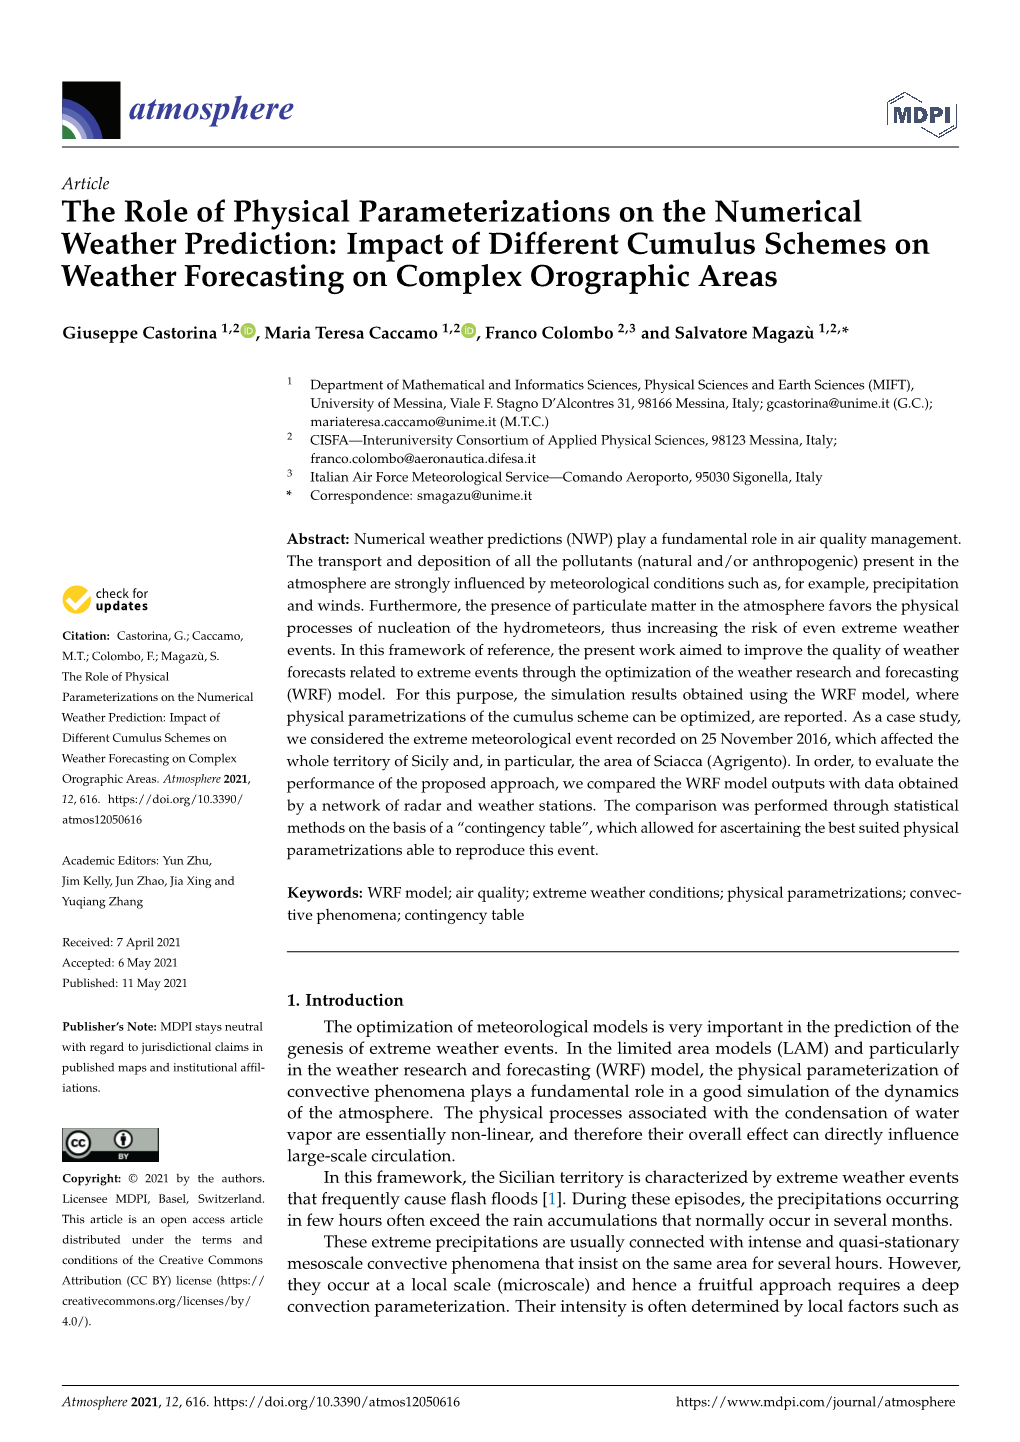 Impact of Different Cumulus Schemes on Weather Forecasting on Complex Orographic Areas